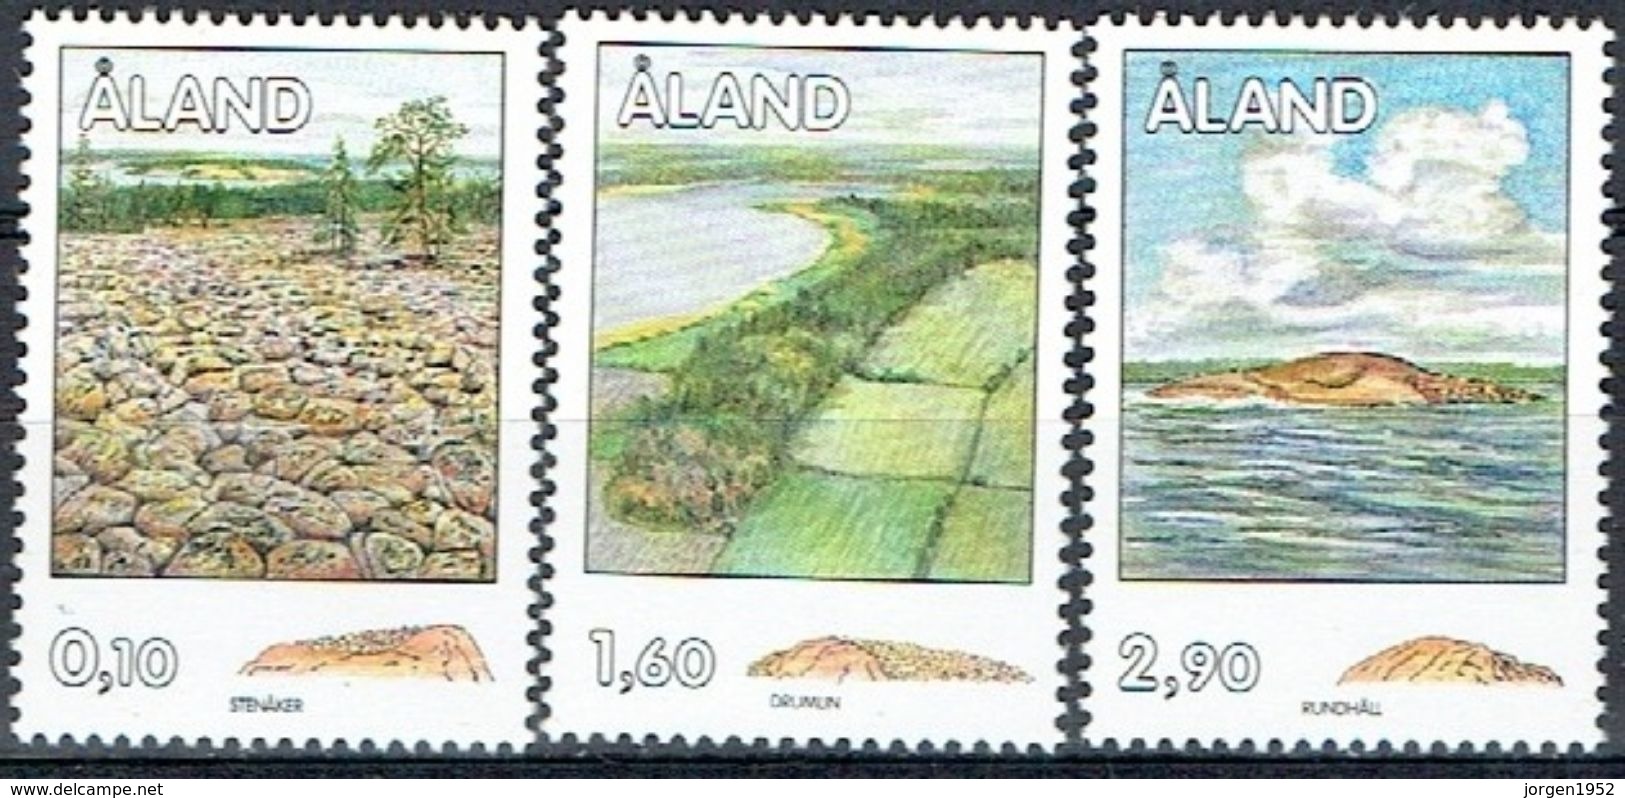 ALAND #  FROM 1994 STAMPWORLD  79-81** - Aland